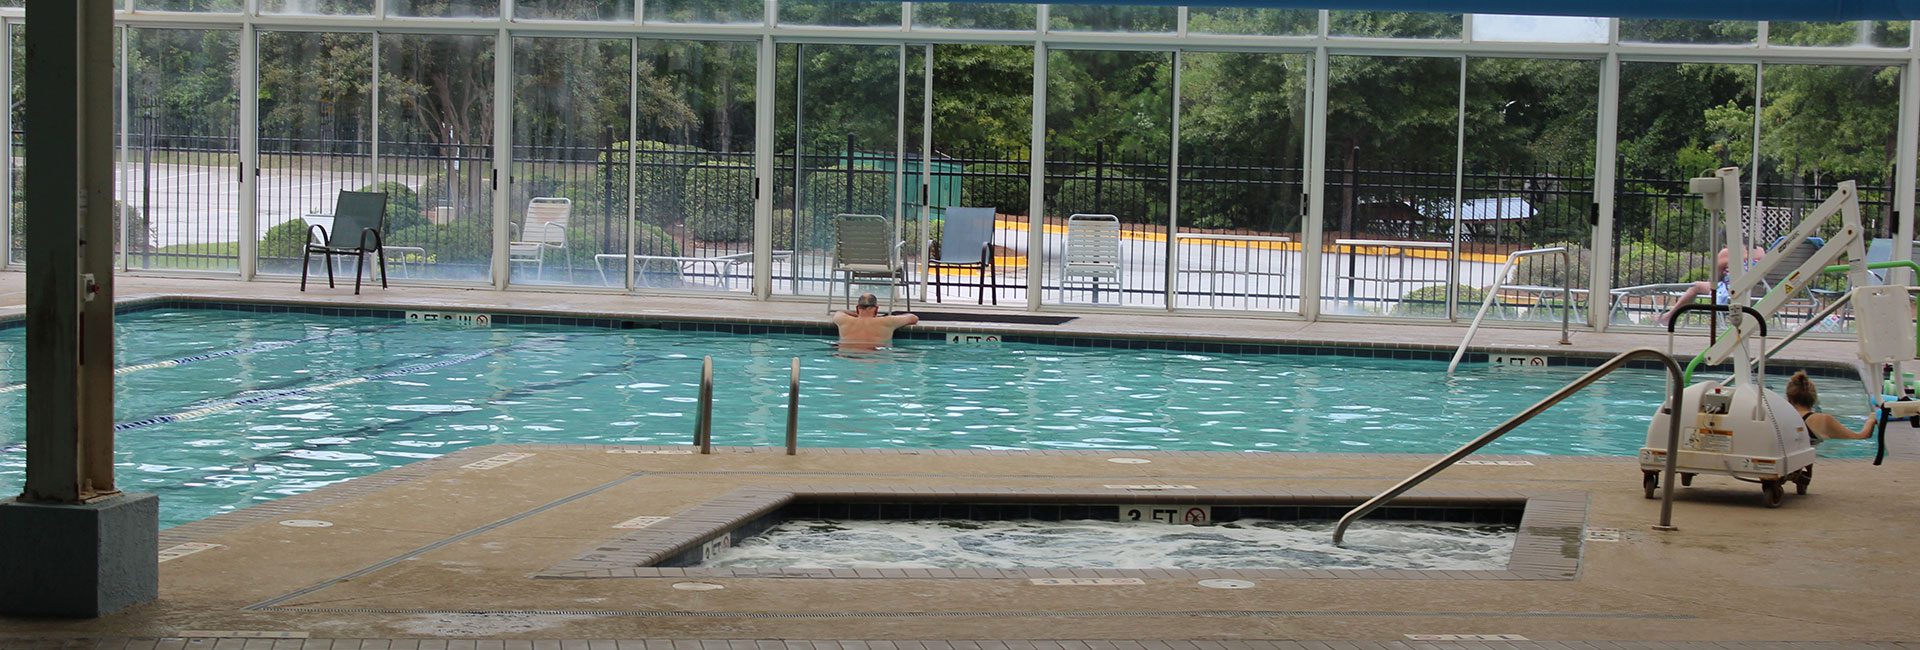 man lounging in a pool at a gym